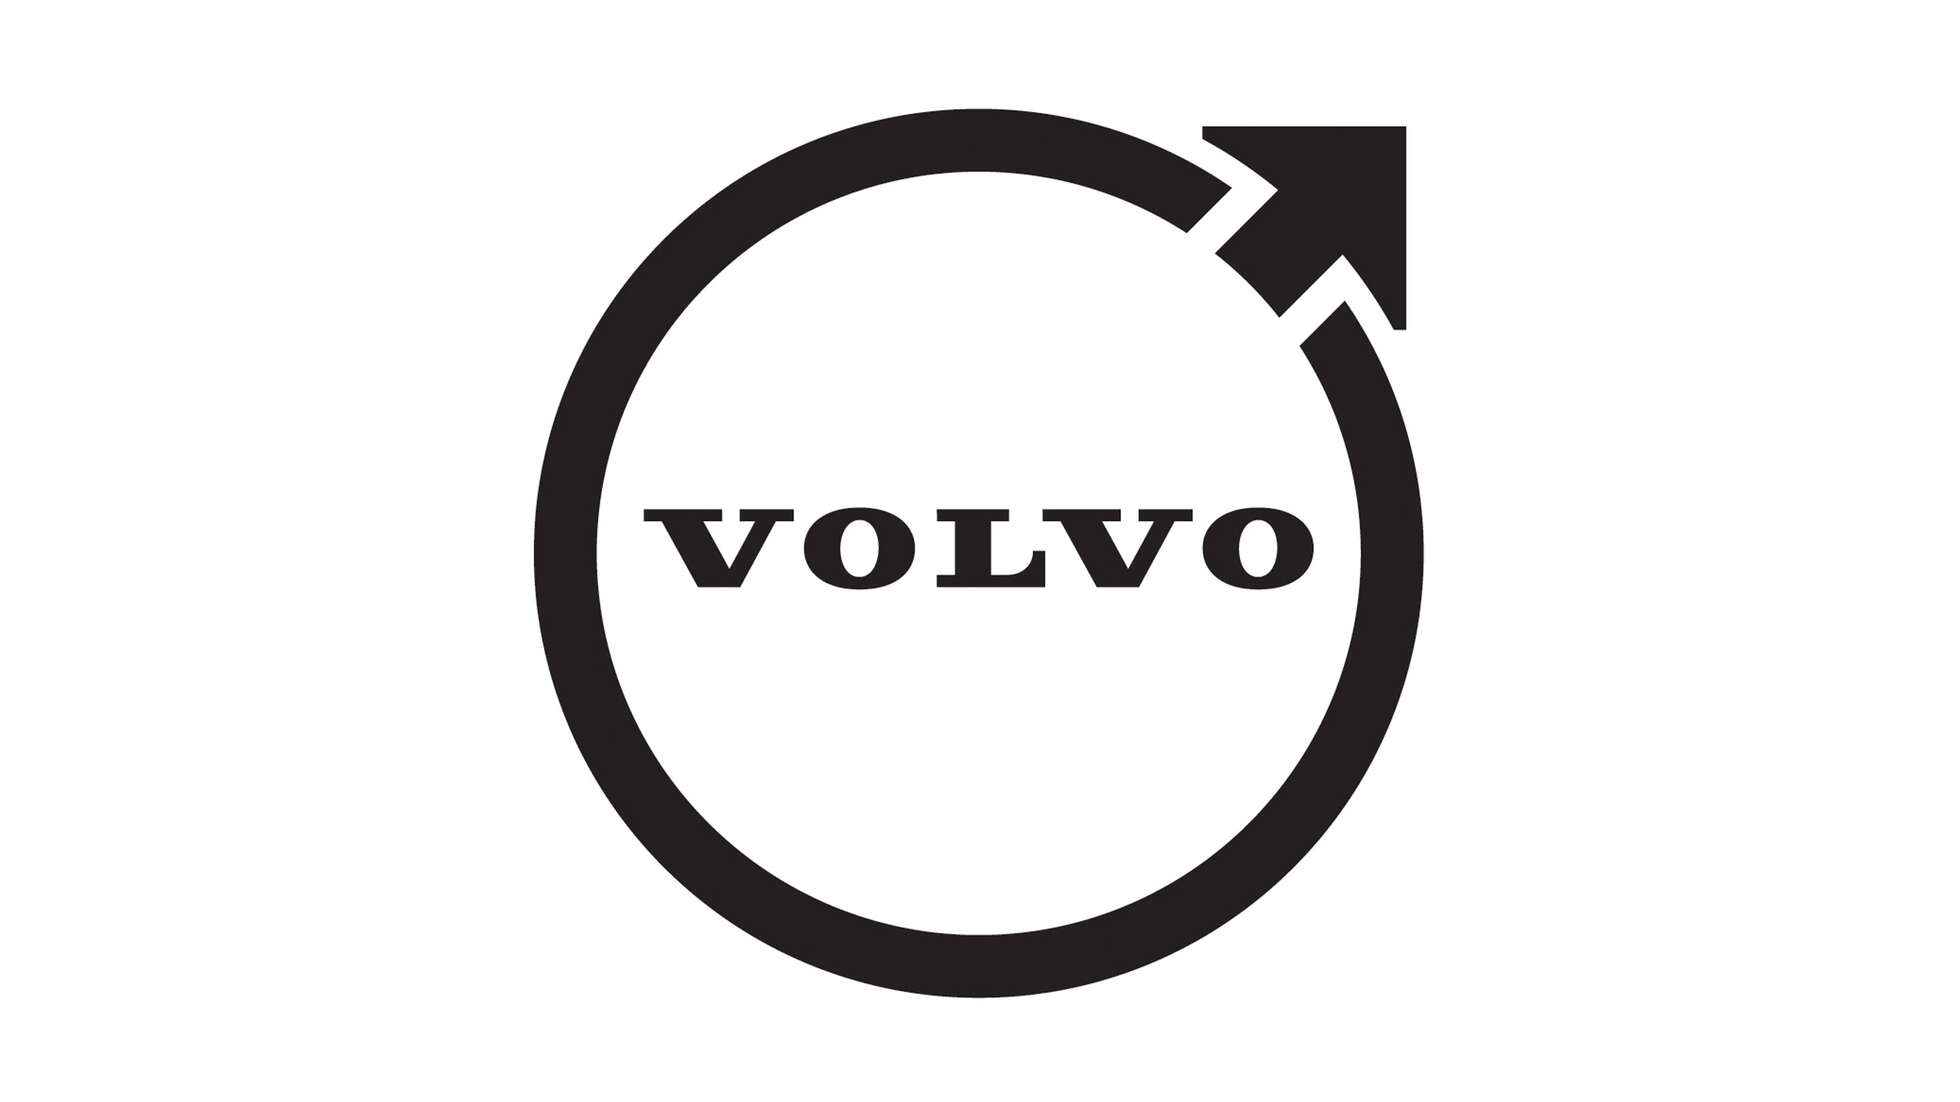 Jim Rowan is Volvo's new CEO - coming from running Dyson